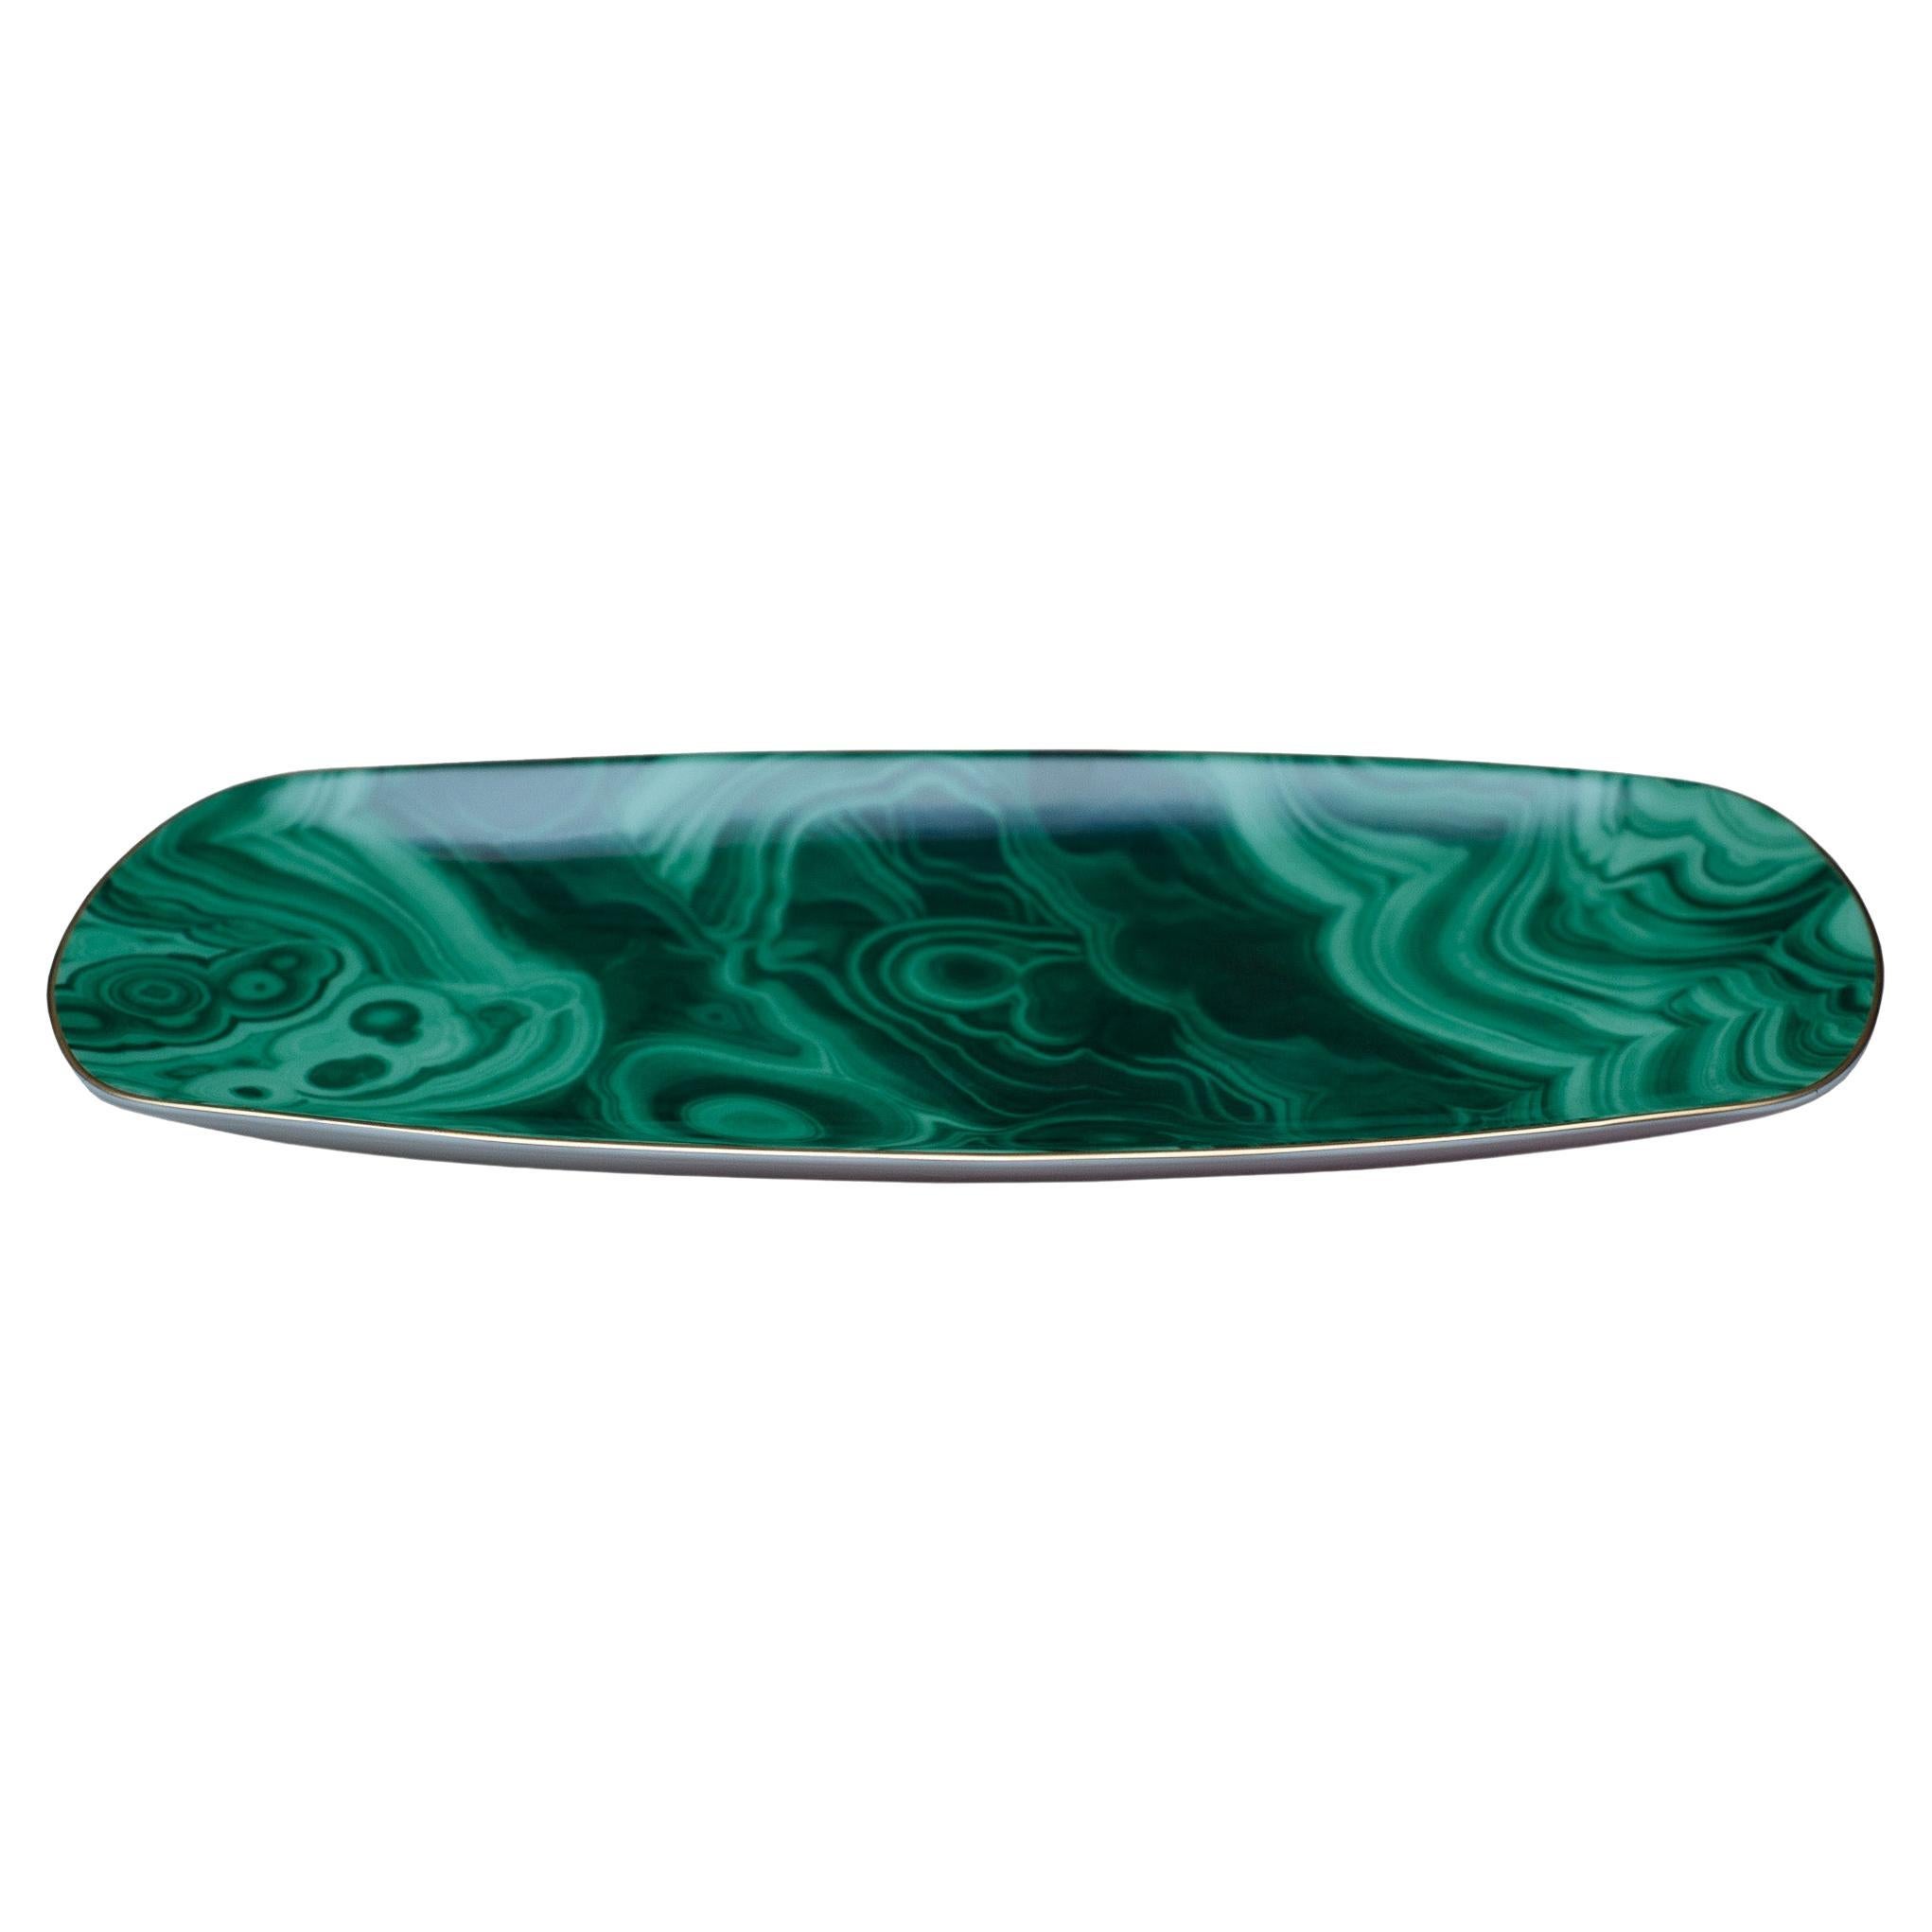 Contemporary Green Malachite Pattern Porcelain Serving Tray